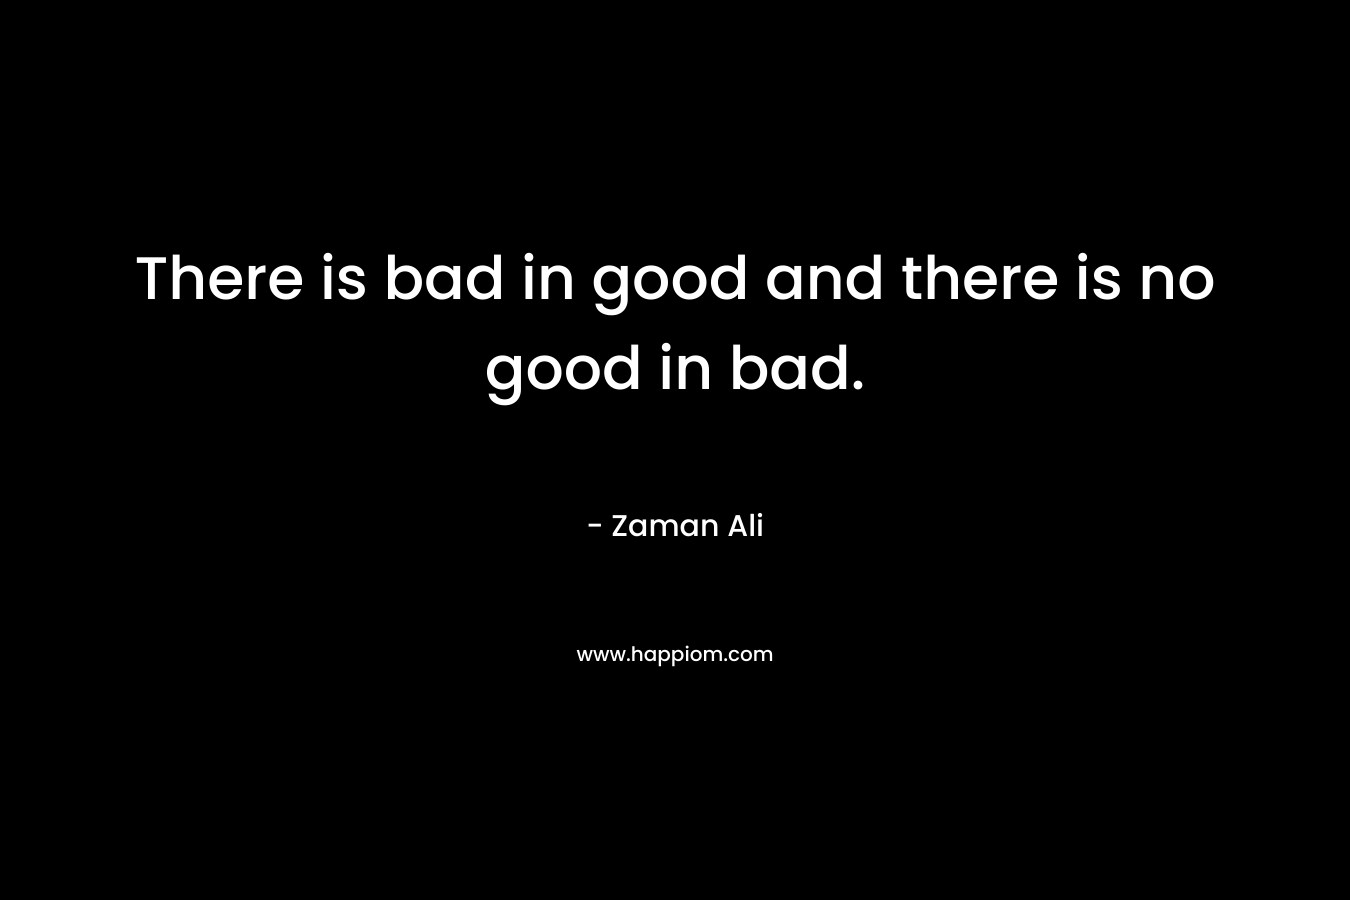 There is bad in good and there is no good in bad. – Zaman Ali